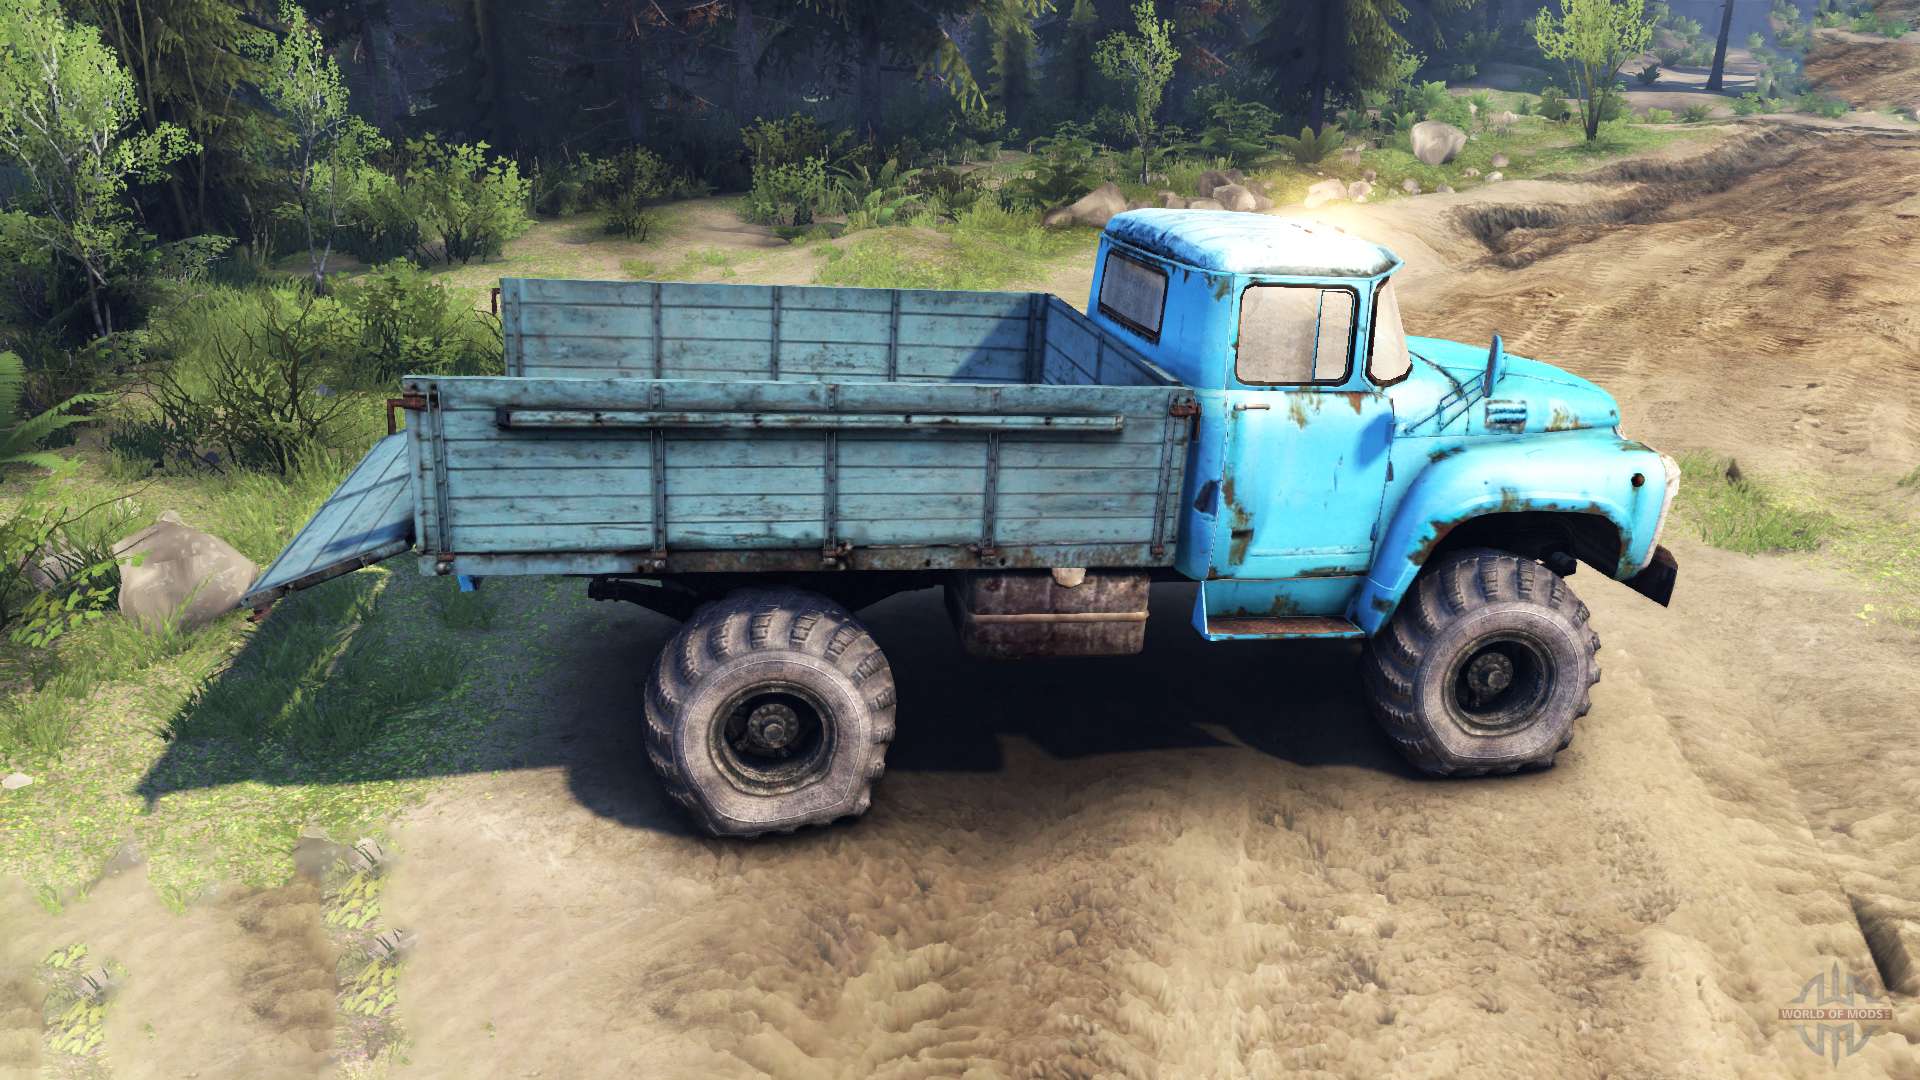 Зил 130 4 4. ЗИЛ 130. ЗИЛ 130 4x4. ЗИЛ 130 4x4 для Spin Tires. Spin Tires ЗИЛ.